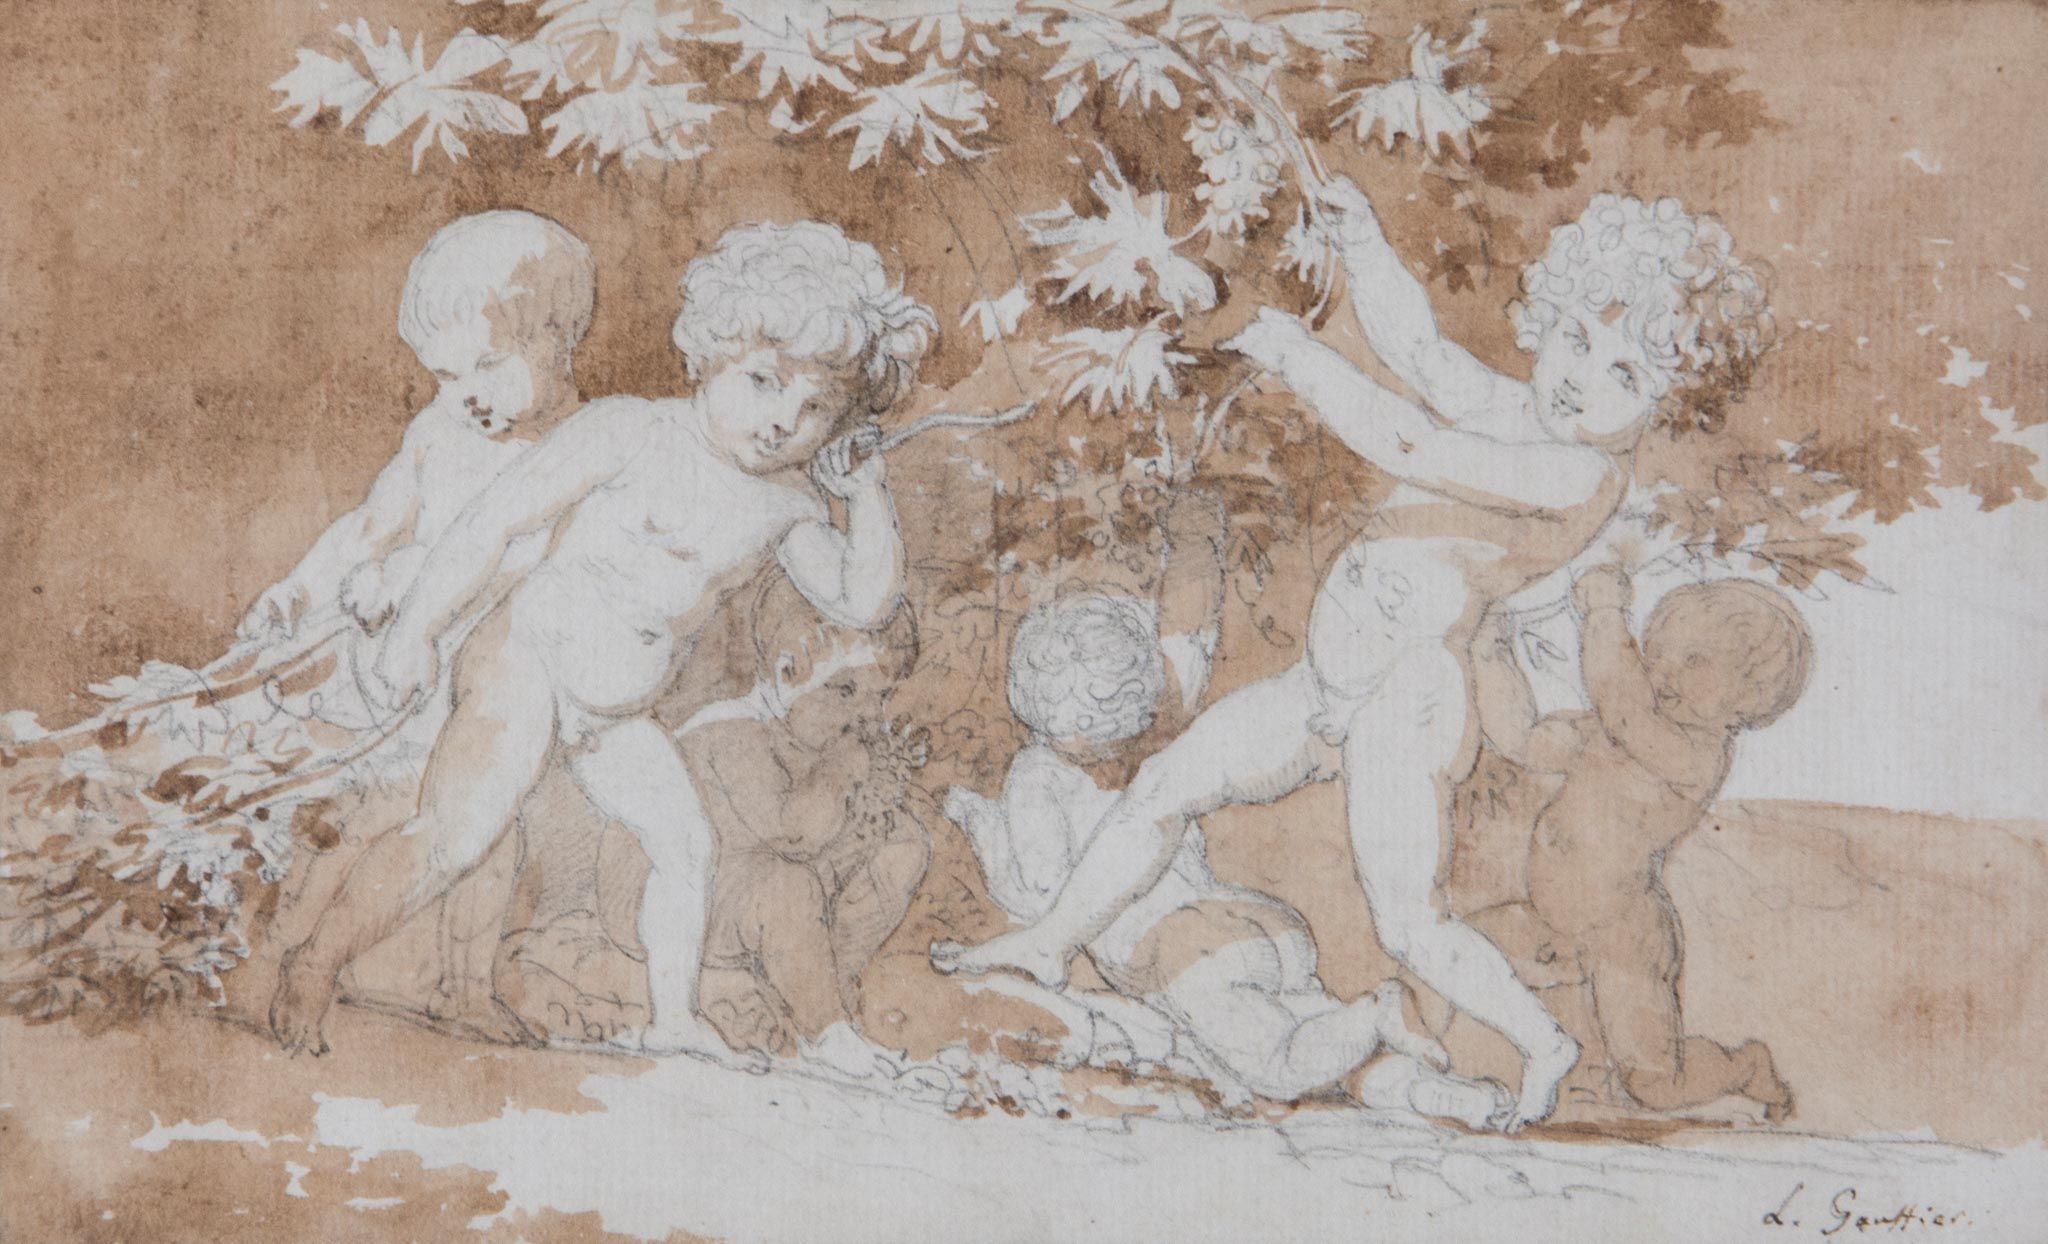 Louis Gauffier (1761-1801) - Six cherubs playing and collecting grapes, Pencil with sepia wash, on